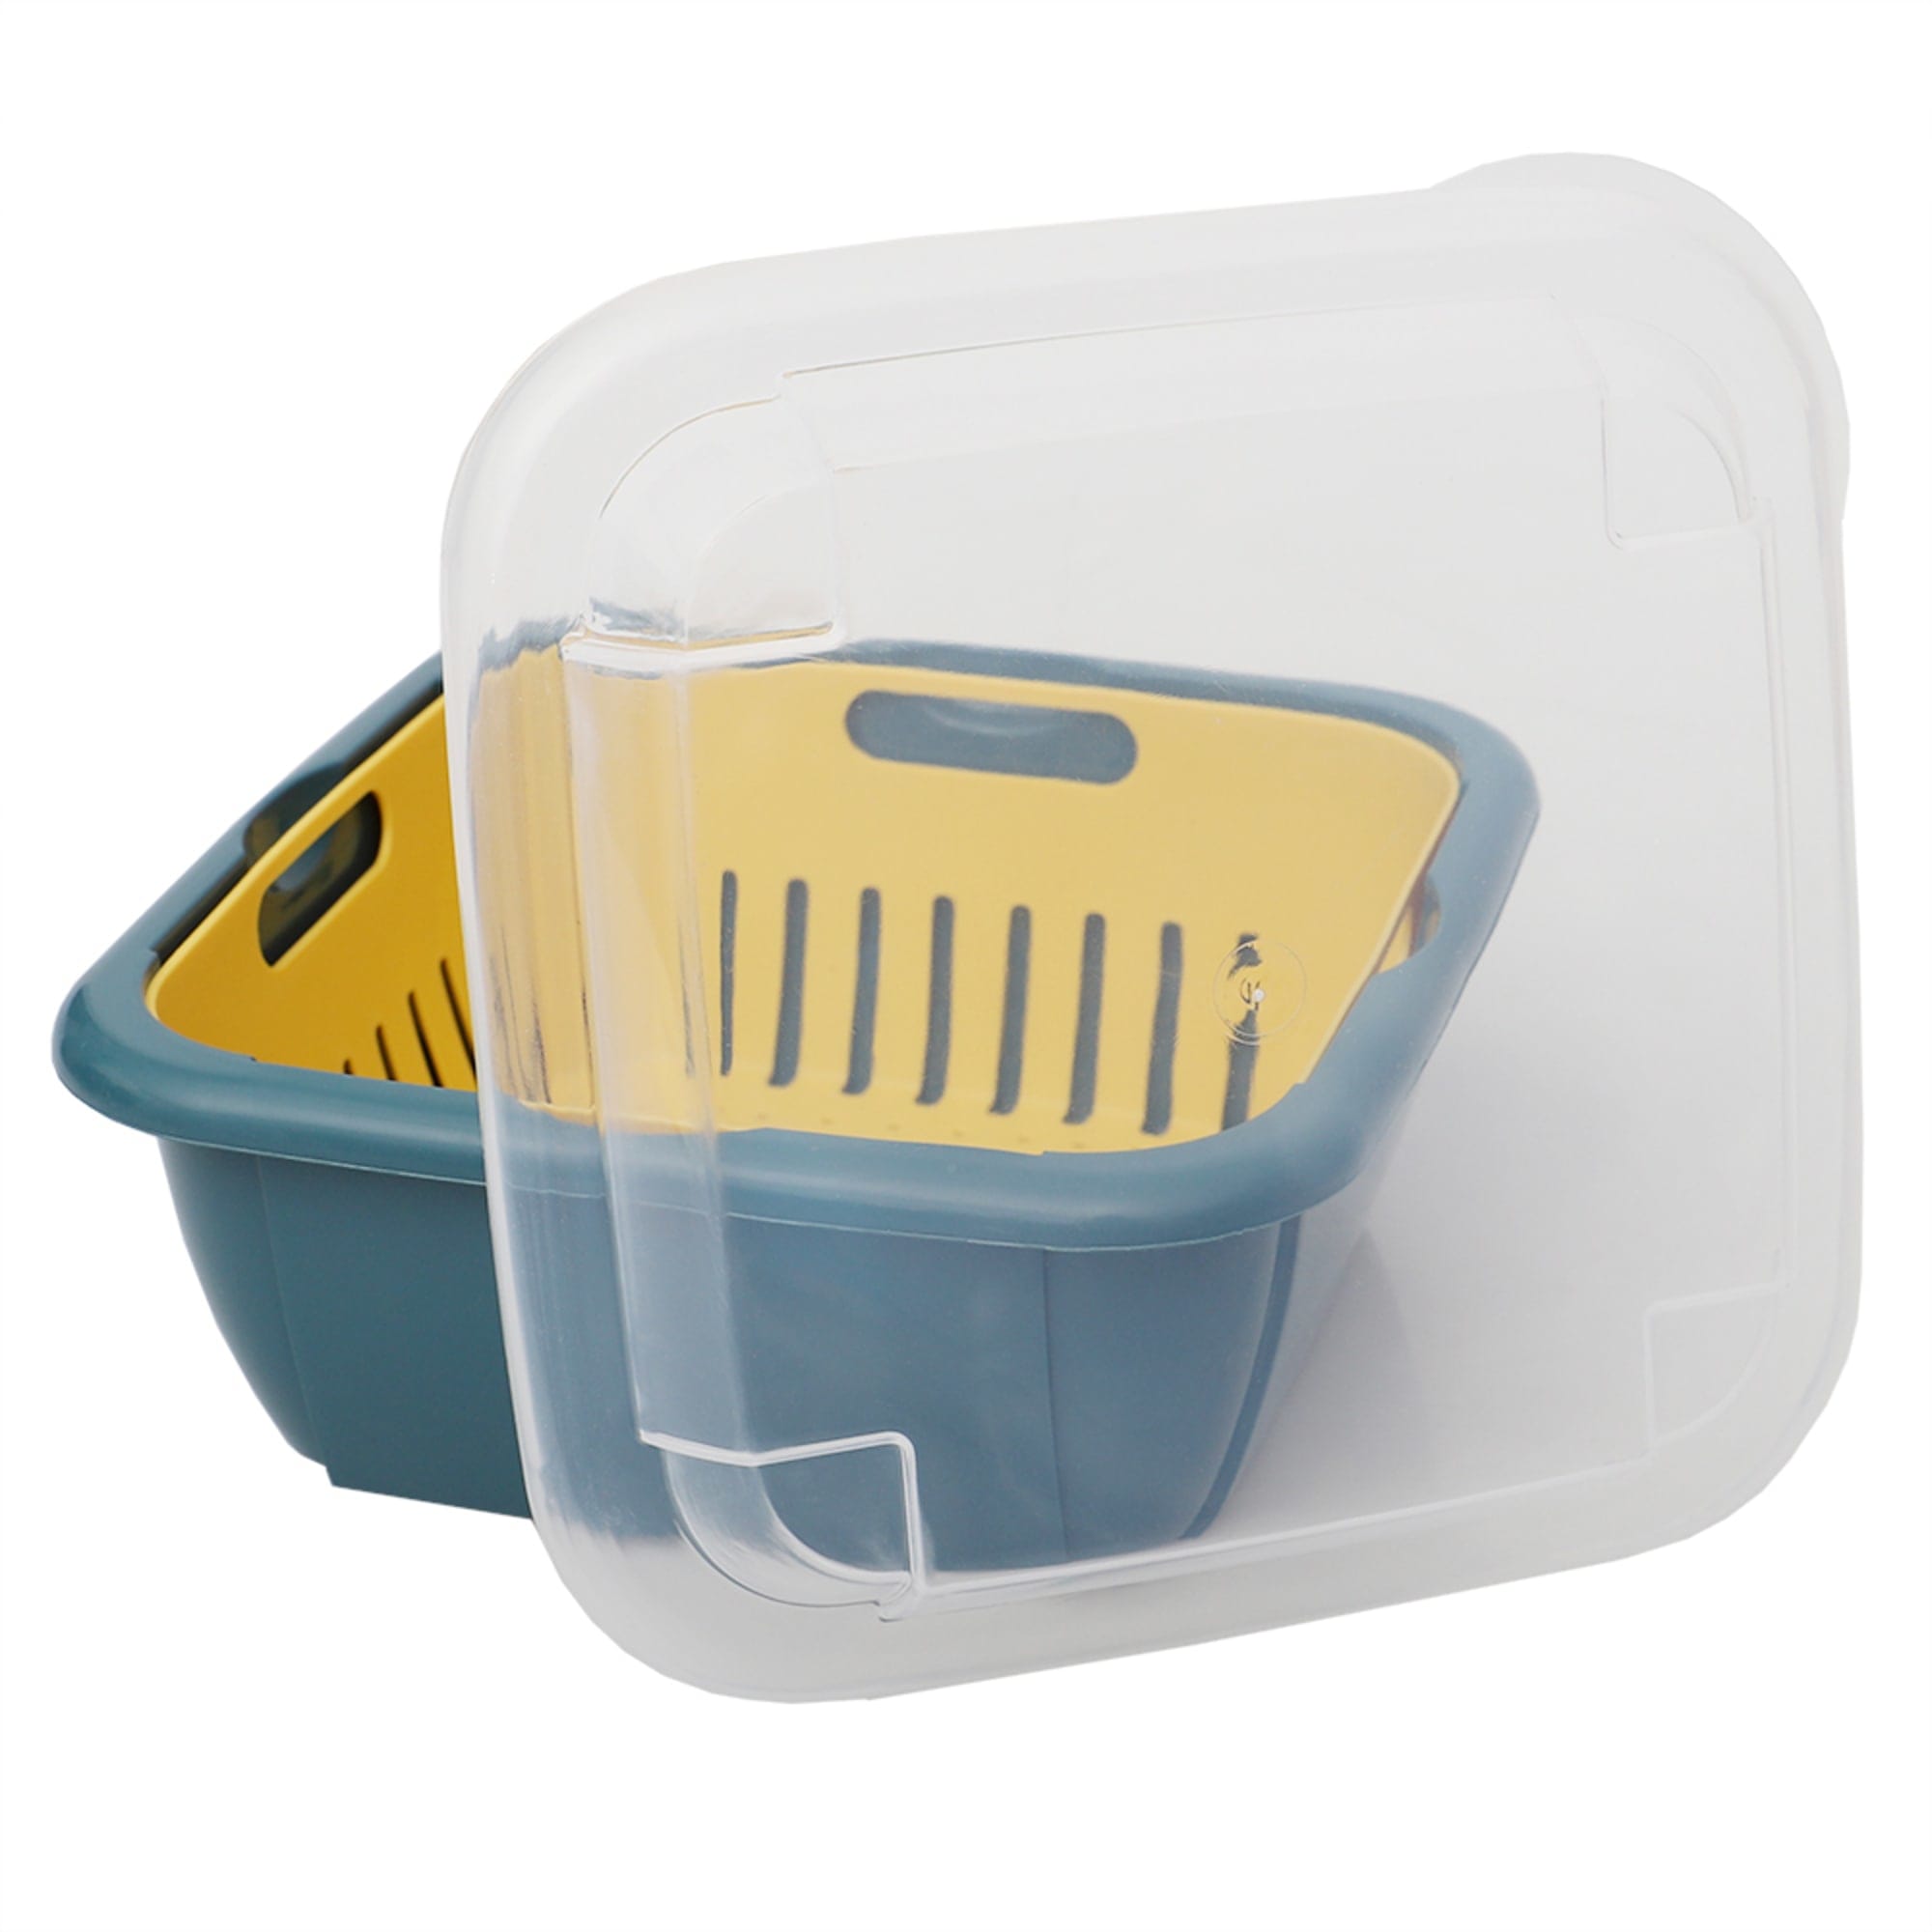 Home Basics Plastic Container with Strainer Basket and Clear Lid, Multi-Color $2.00 EACH, CASE PACK OF 12